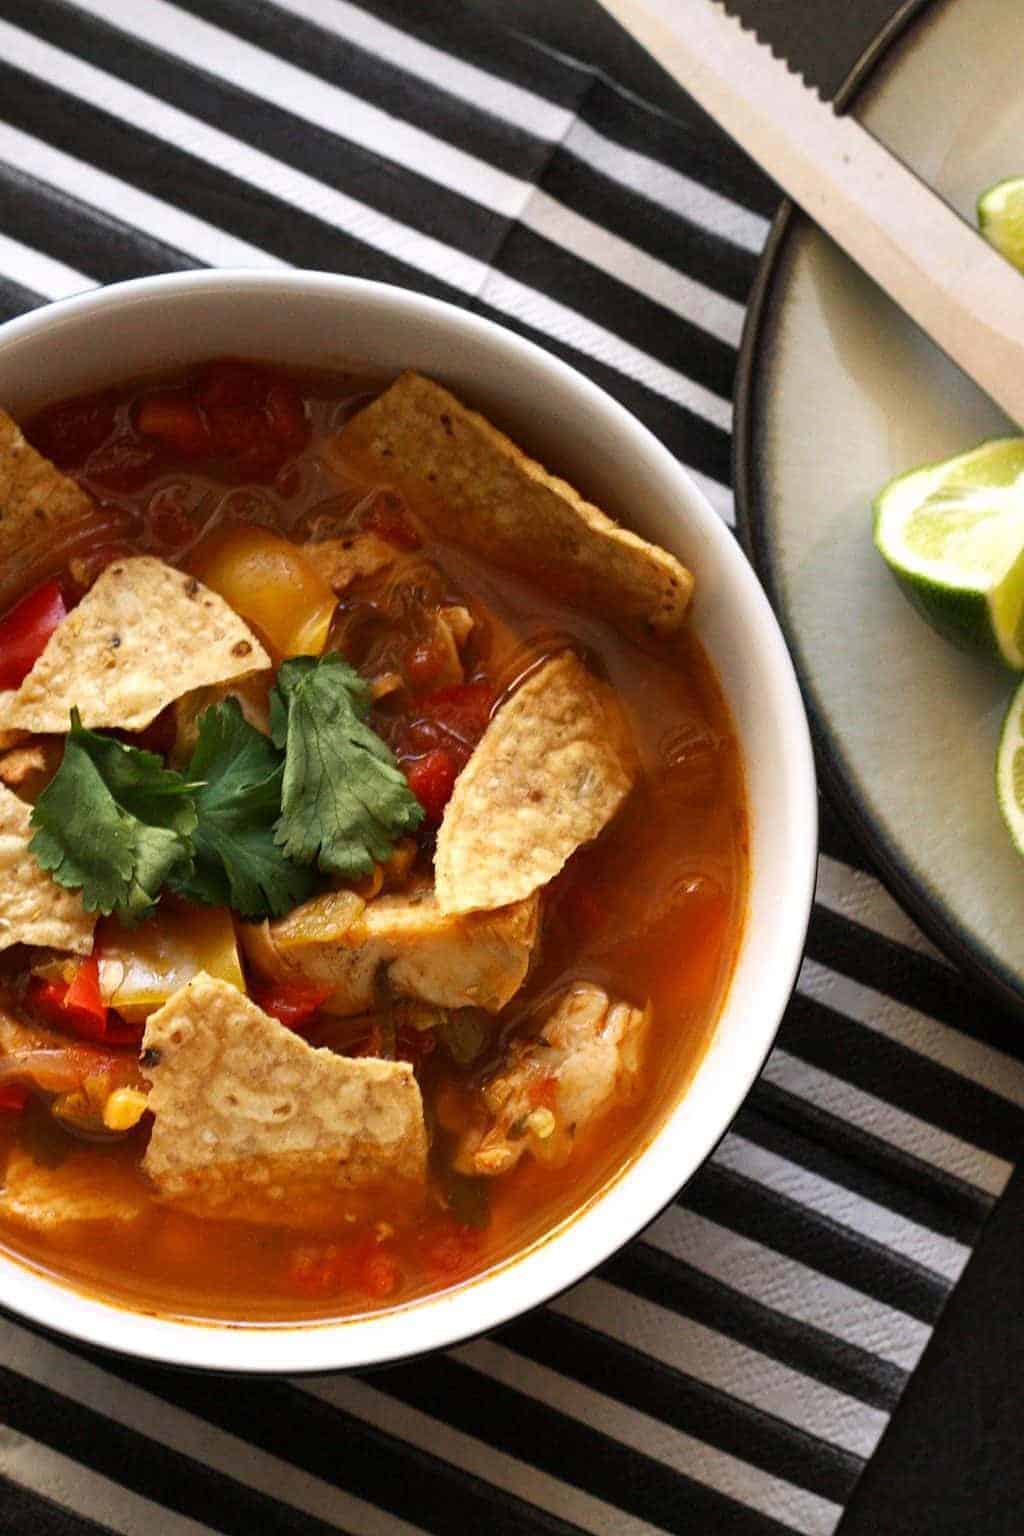 This chicken tortilla soup is easy to make thanks to pre-cooked chicken - you can even use a rotisserie chicken.  It is full of vegetables and spice!